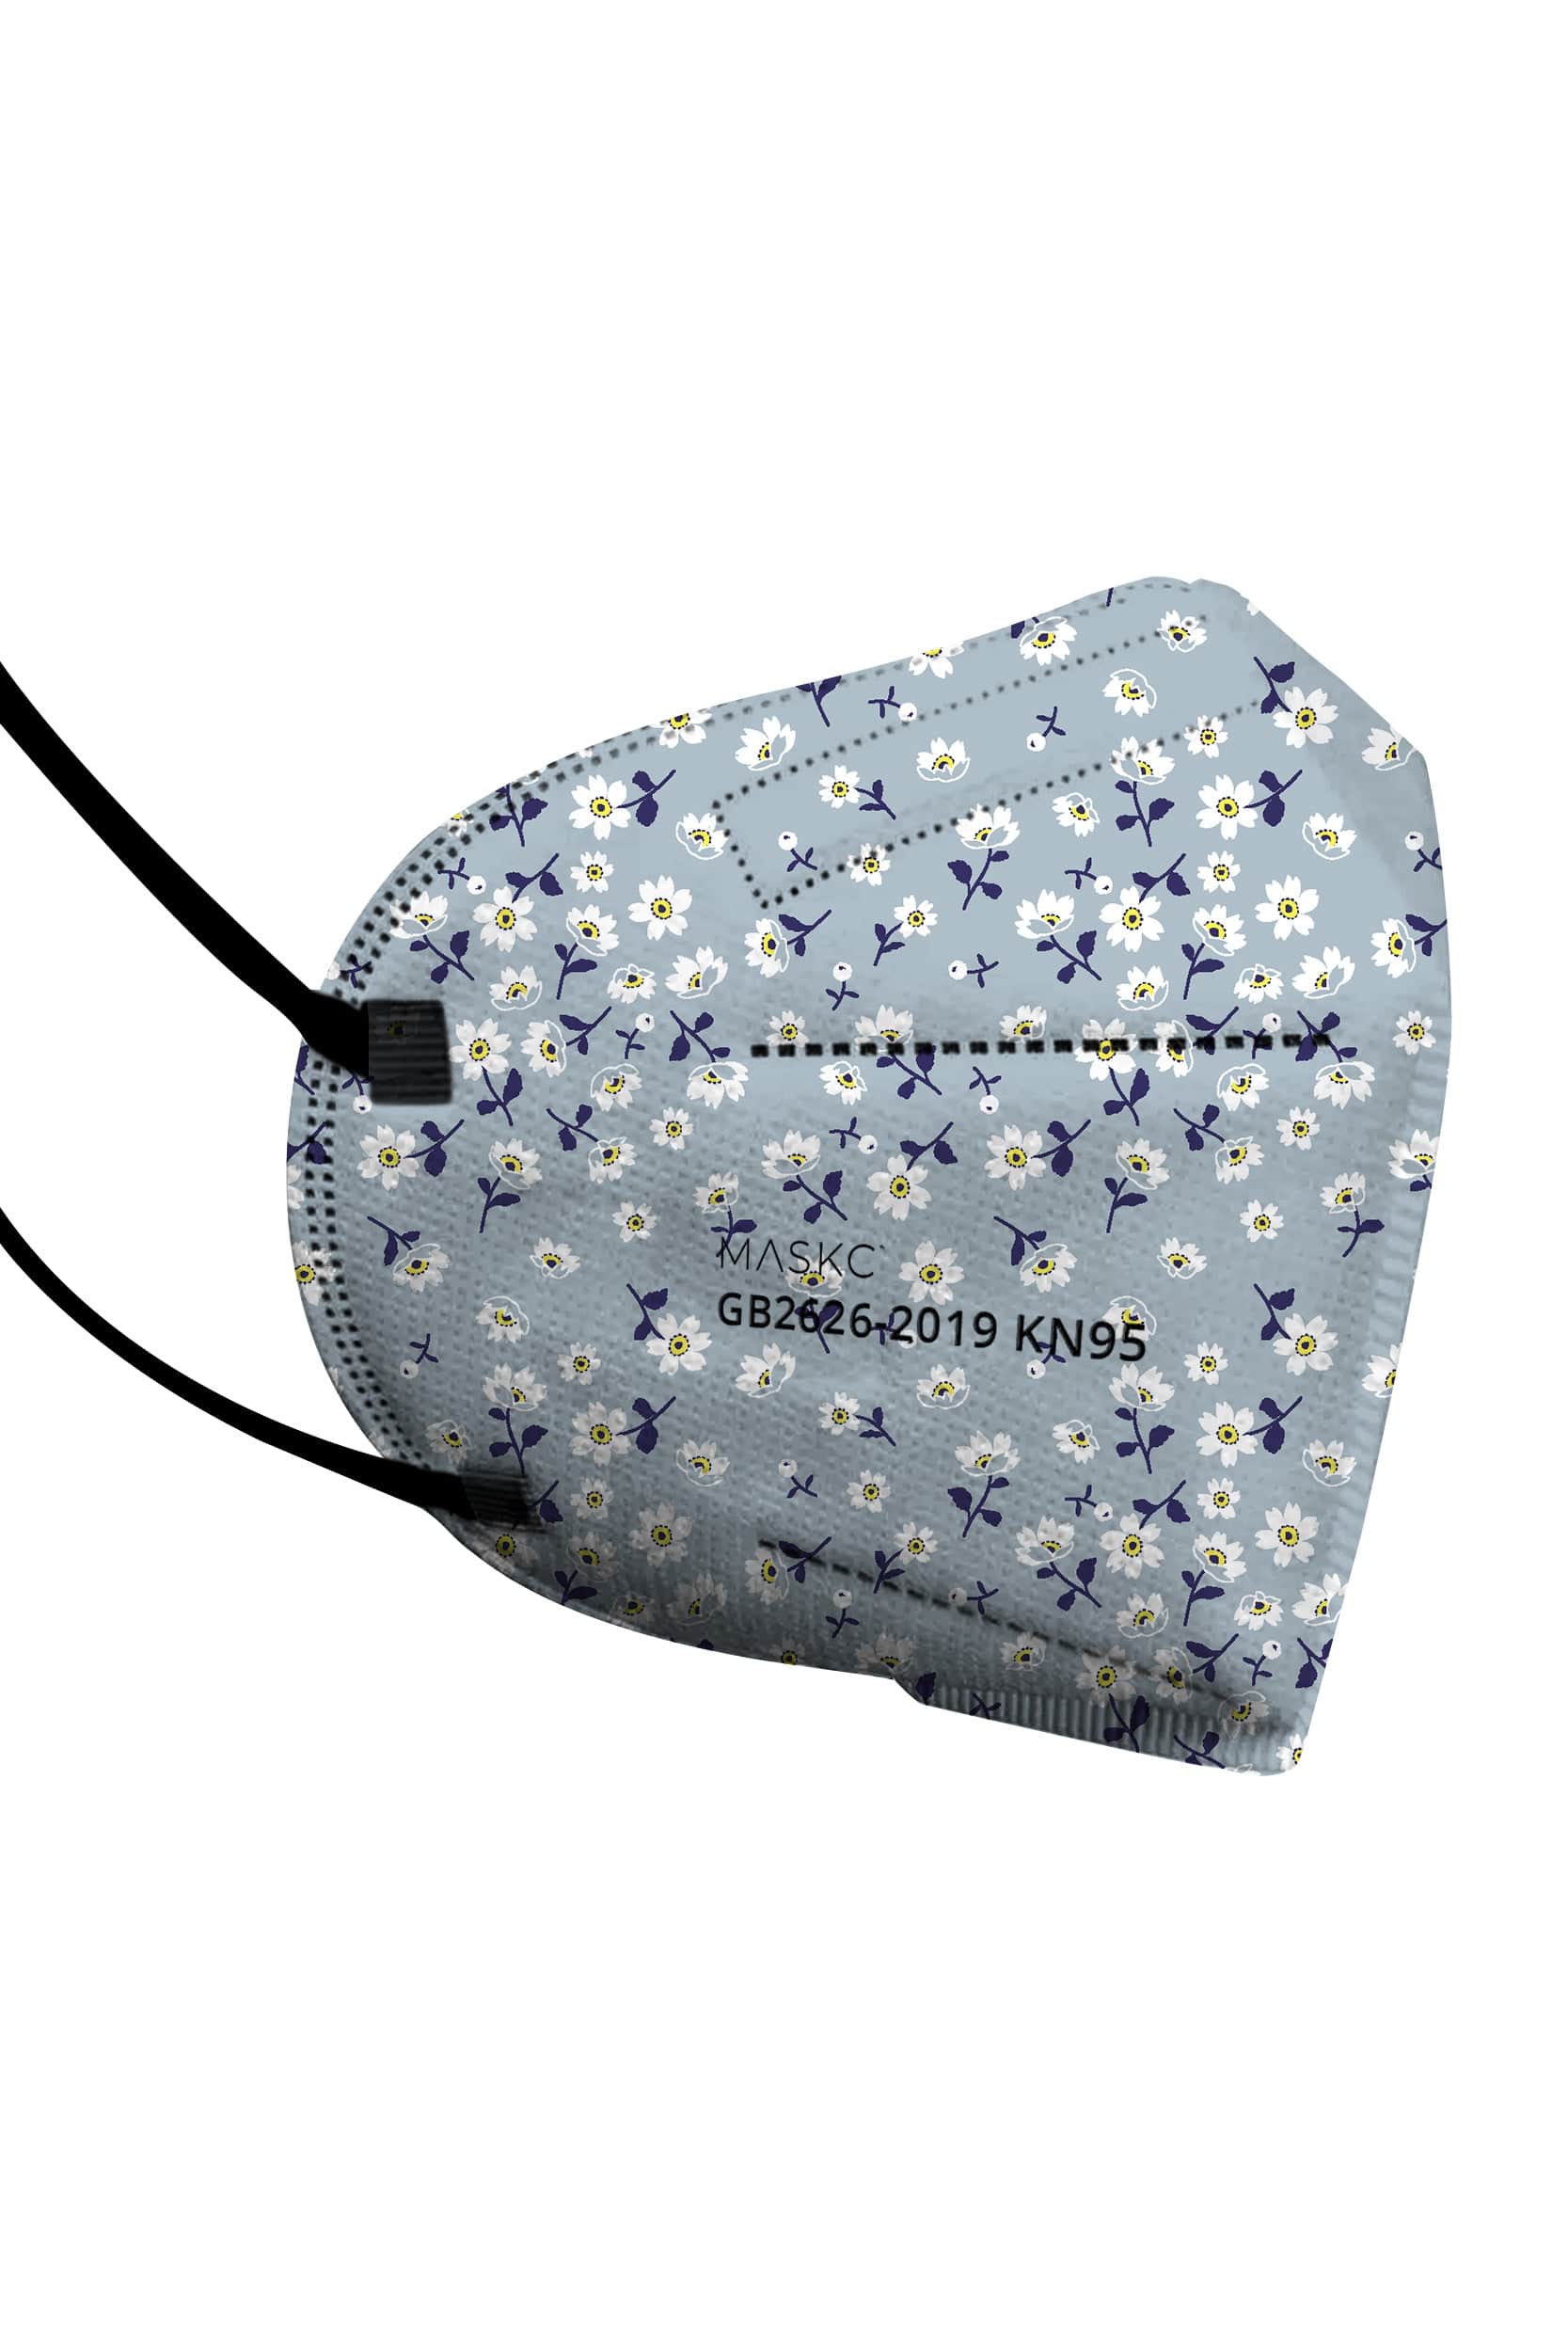 Stylish Blue Floral KN95 face mask, with soft black ear loops and high quality fabric. 